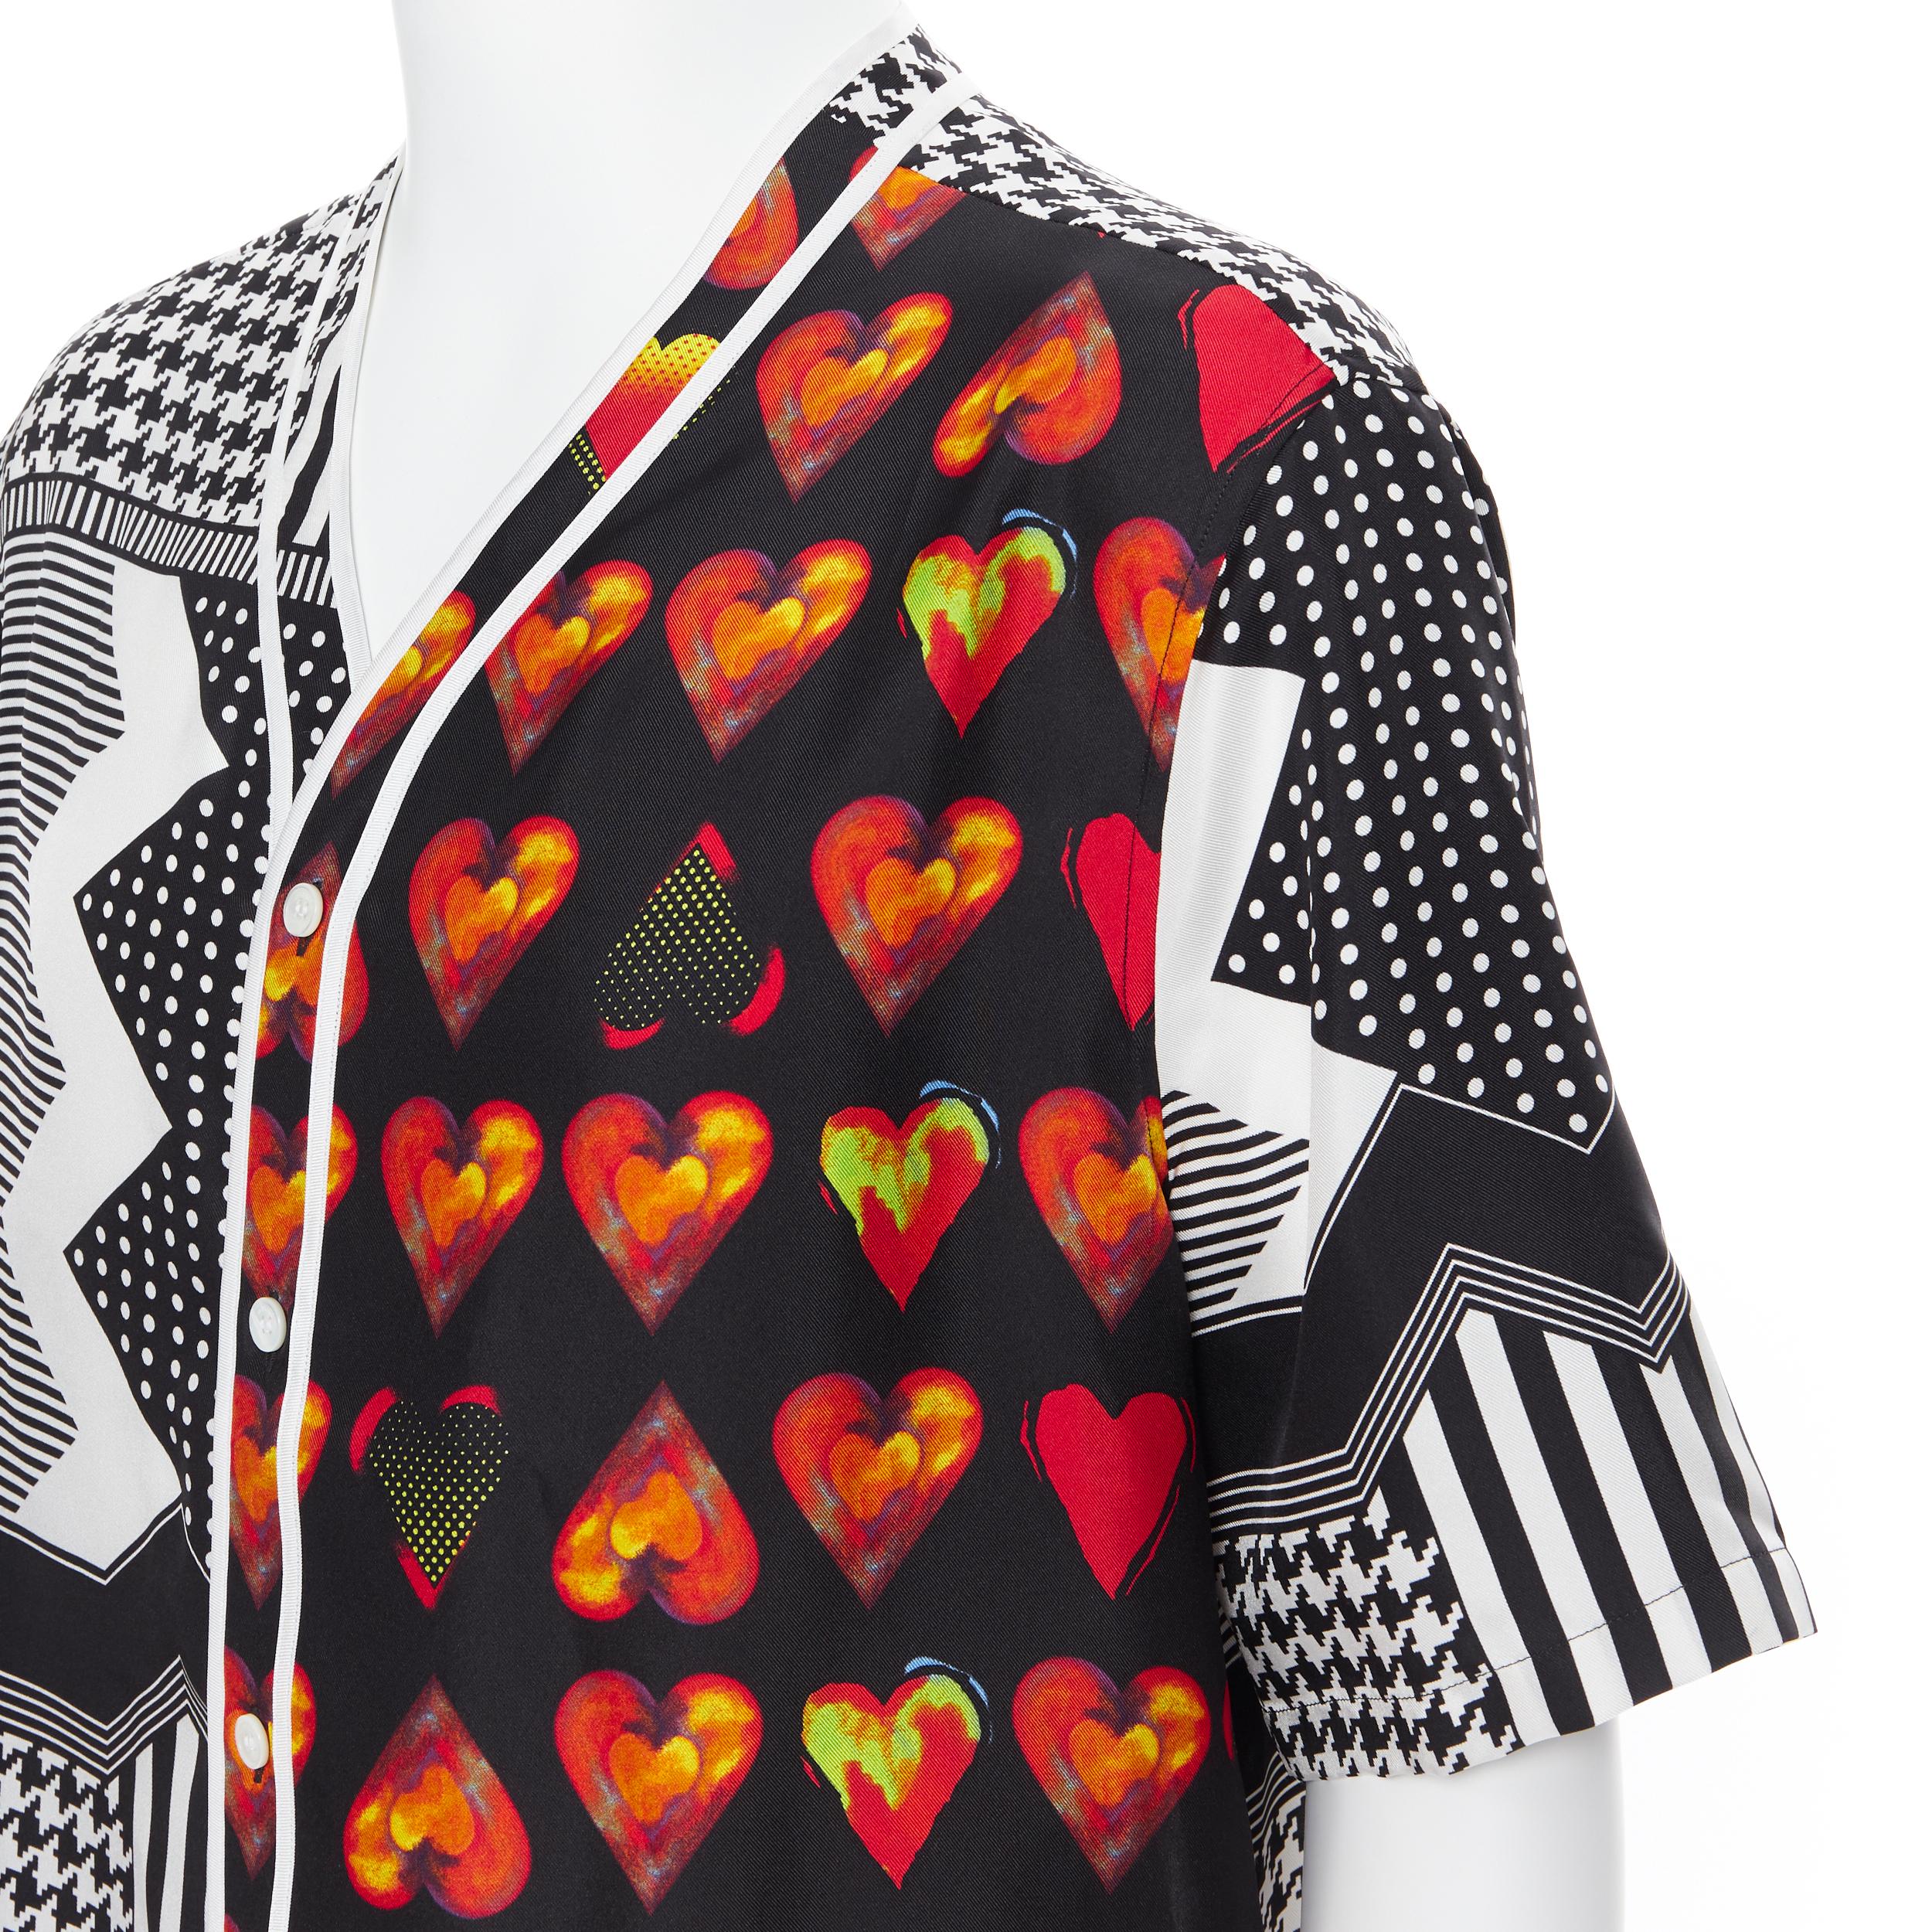 new VERSACE 2019 100% silk Double Love Heart geometric baseball shirt EU39 M
Reference: TGAS/B00083
Brand: Versace
Designer: Donatella Versace
Collection: Pre Fall 2019 
Material: Silk
Color: Black
Pattern: Abstract
Closure: Button
Extra Detail: